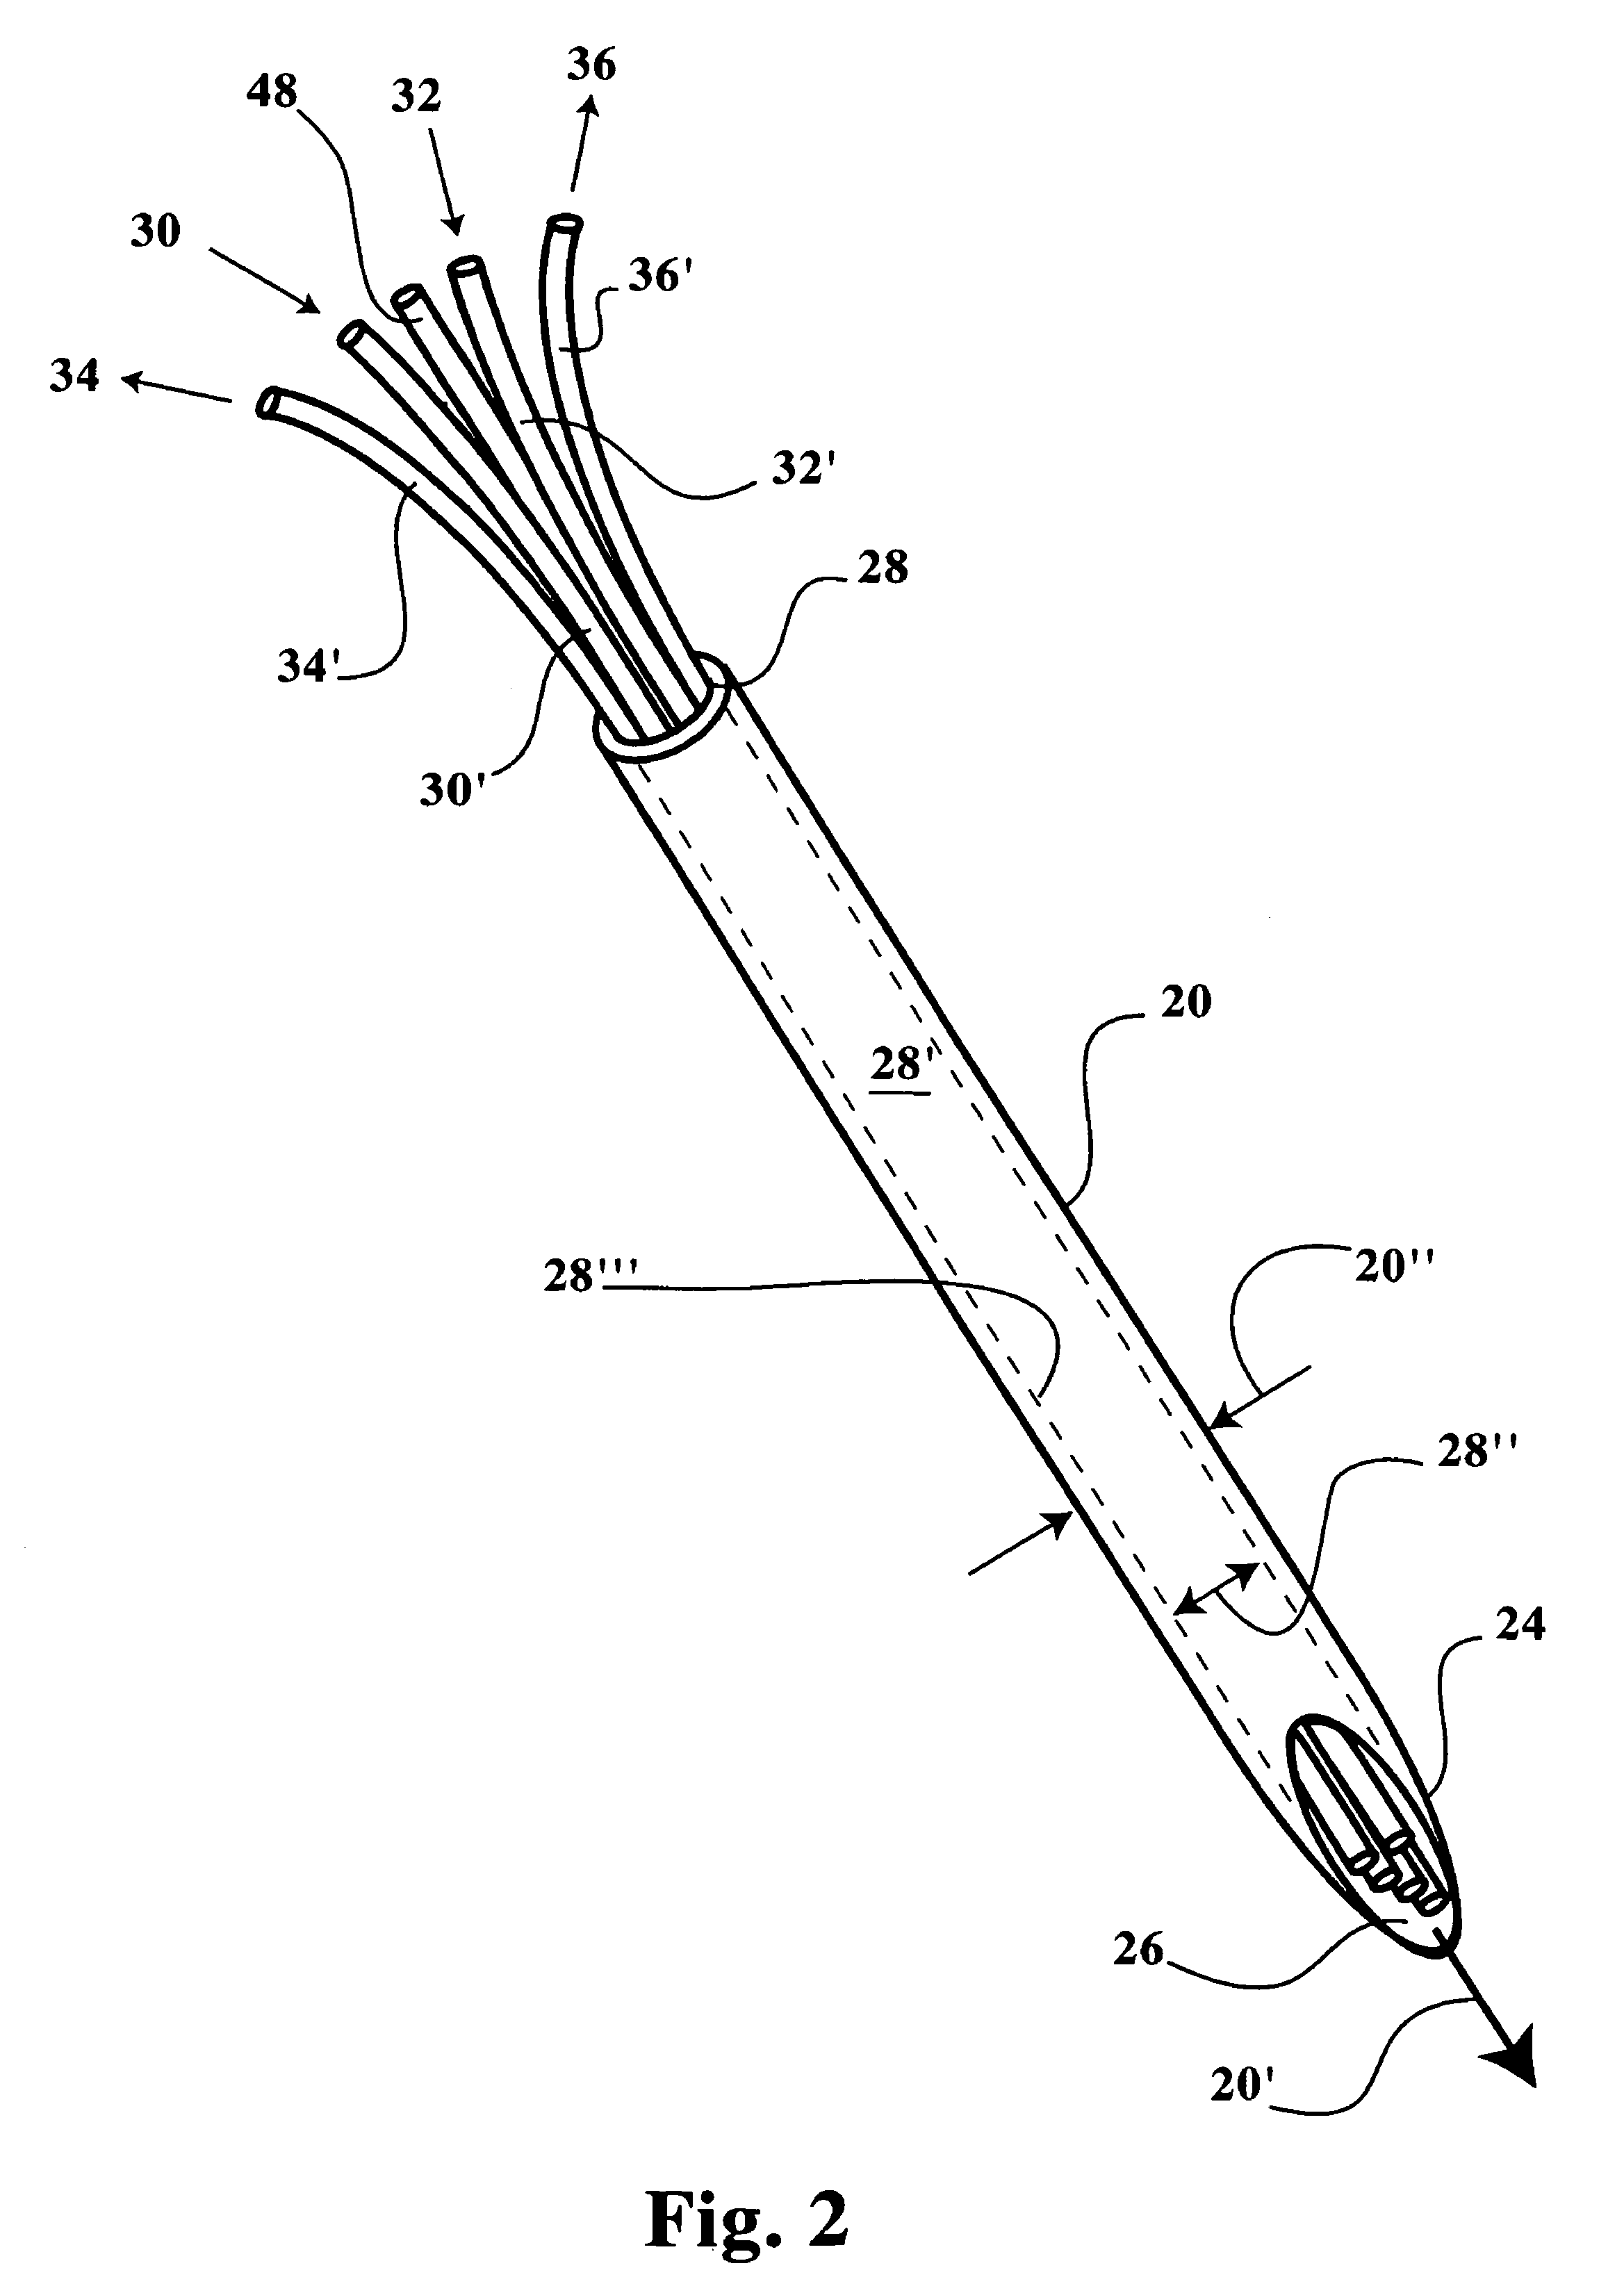 Precision sensing and treatment delivery device for promoting healing in living tissue